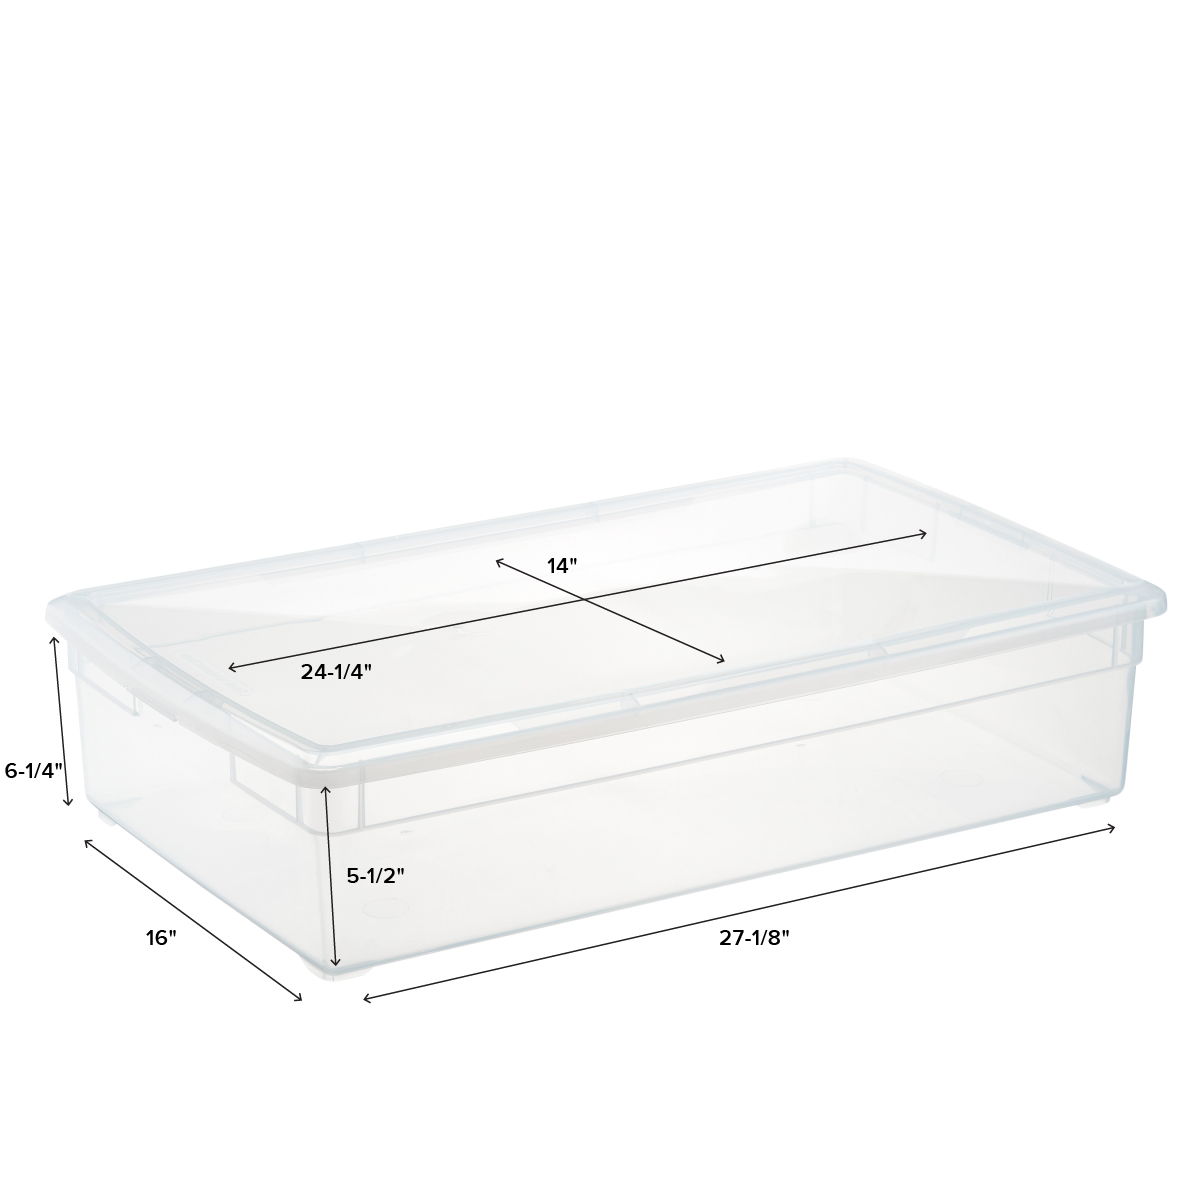 https://www.containerstore.com/catalogimages/419711/10008763-our-underbed-box-DIM.jpg